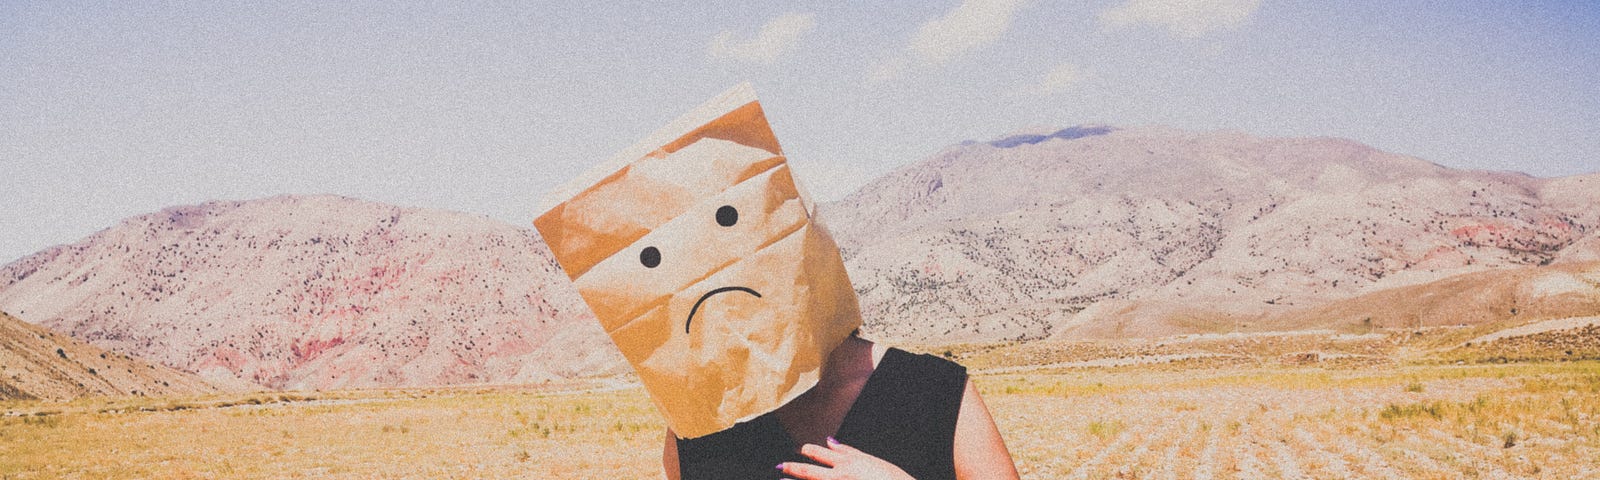 Man in the desert with a paper bag over his head